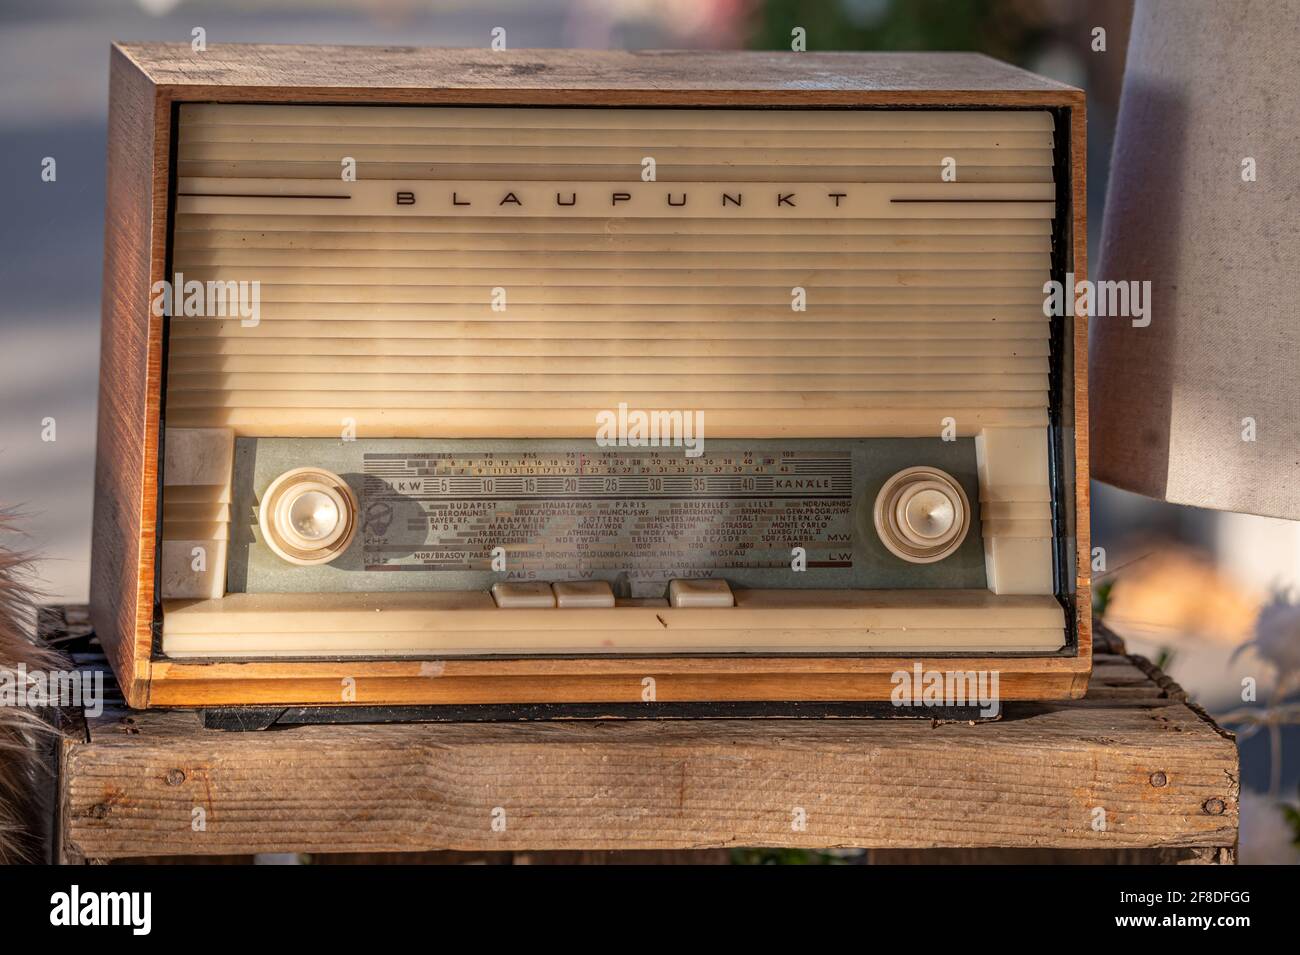 Retro Car Radio High Resolution Stock Photography and Images - Alamy